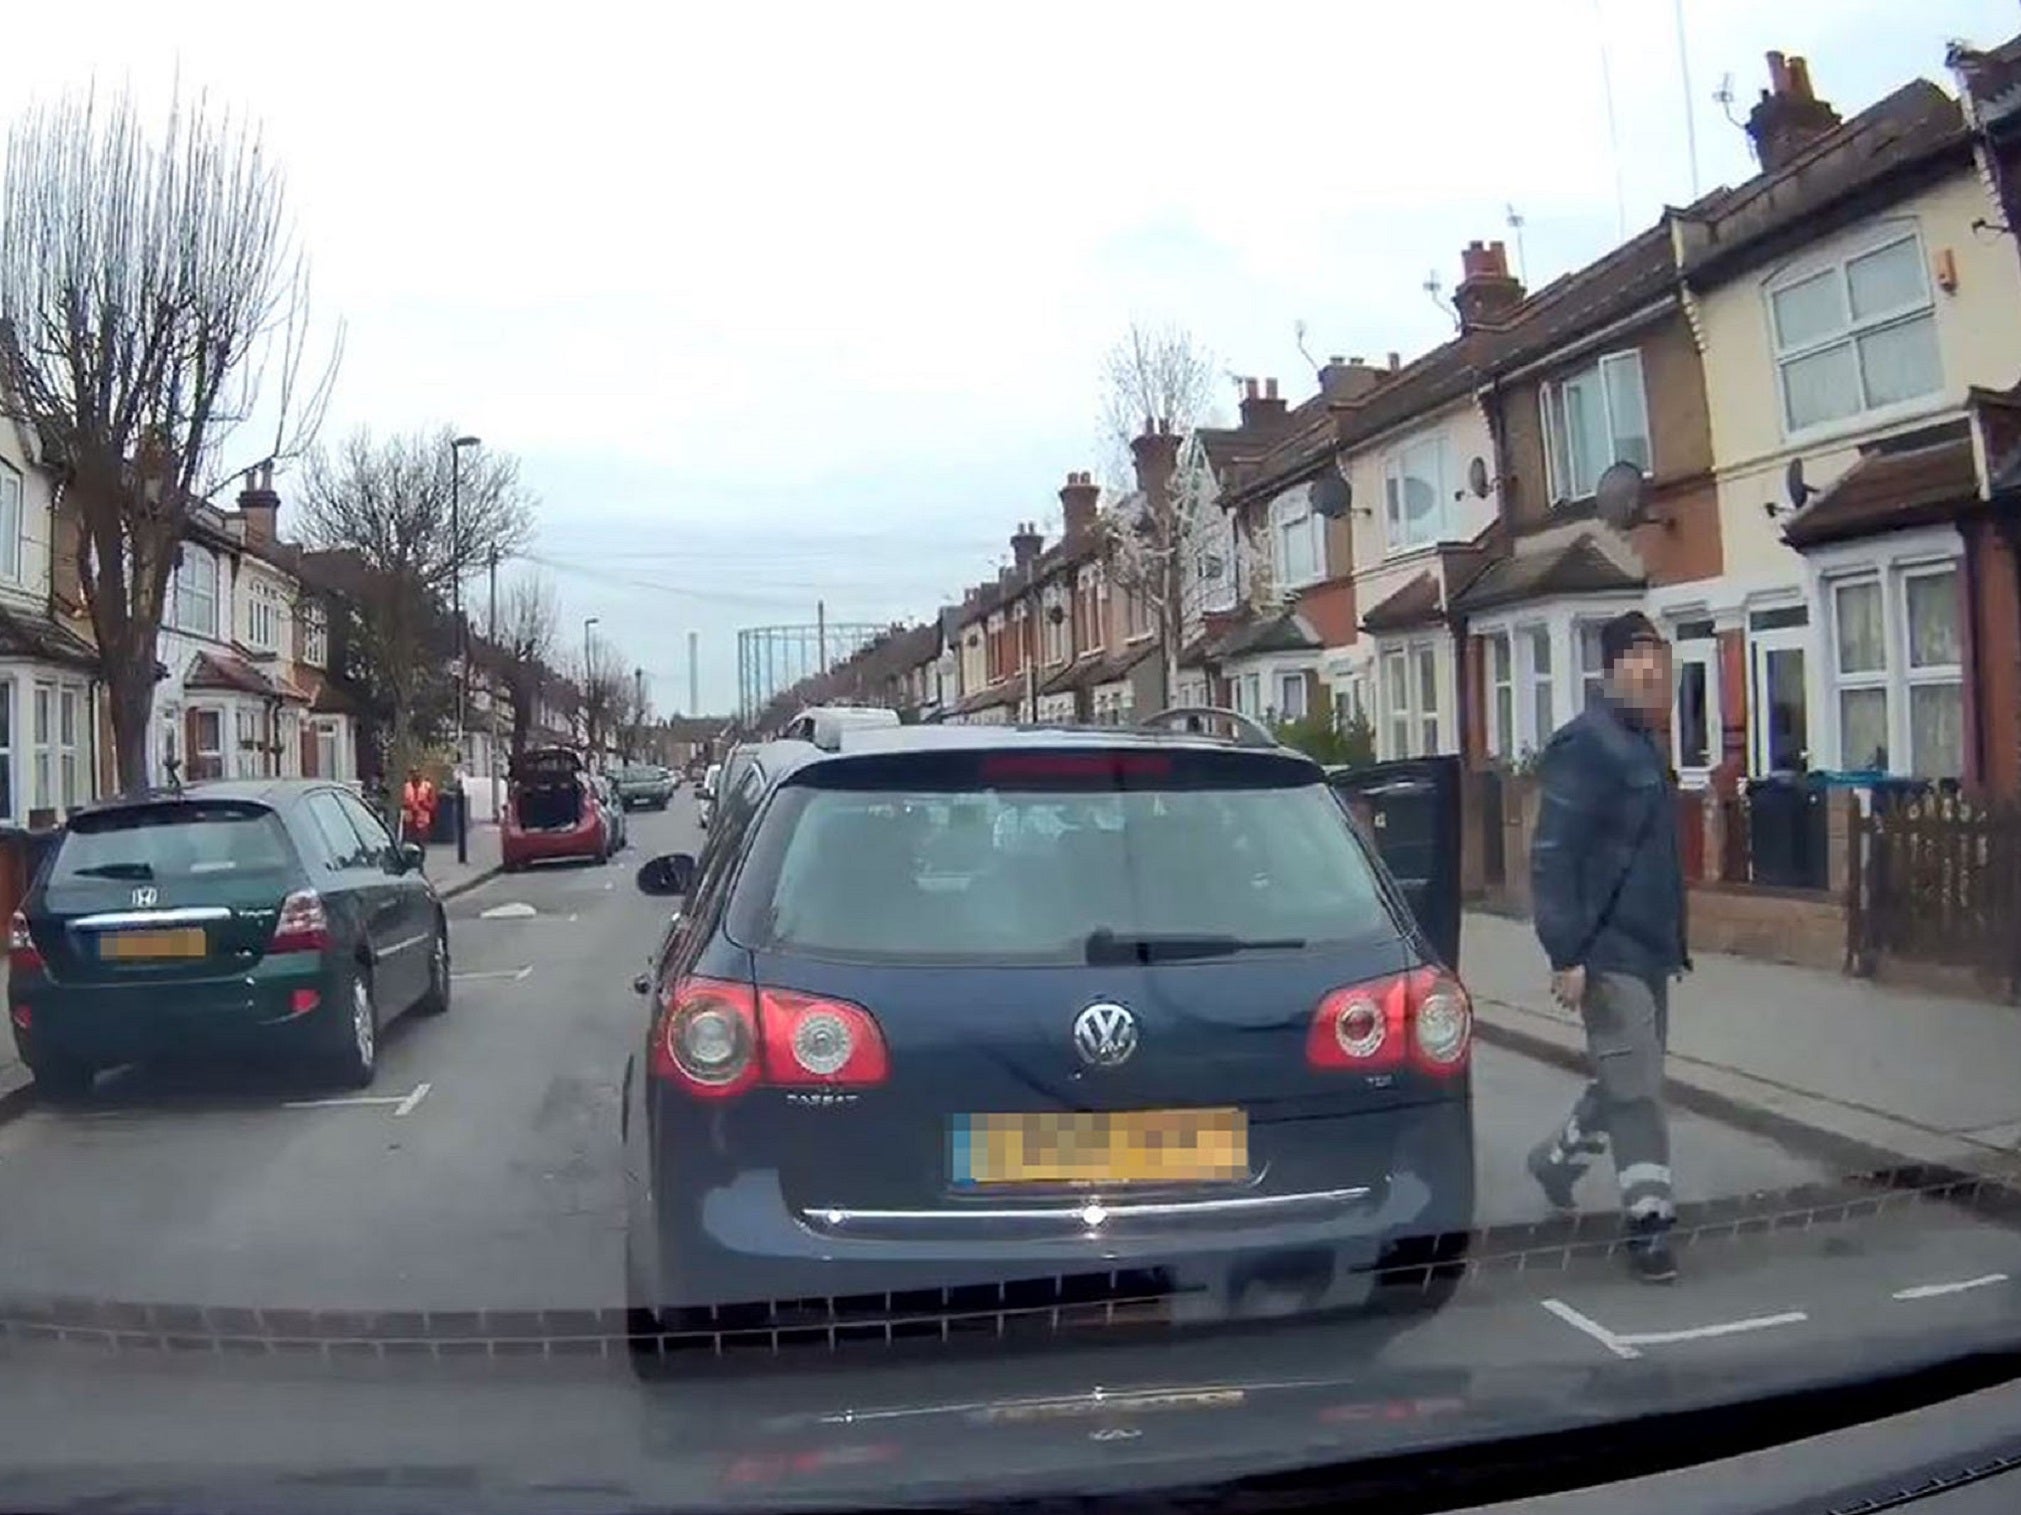 Mustafa Aptish was told to go back to his own country by an angry motorist who claimed he had cut him up in Sutherland Road, Croydon, on 31 December, 2018. Mr Aptish captured the incident on his dashcam footage.